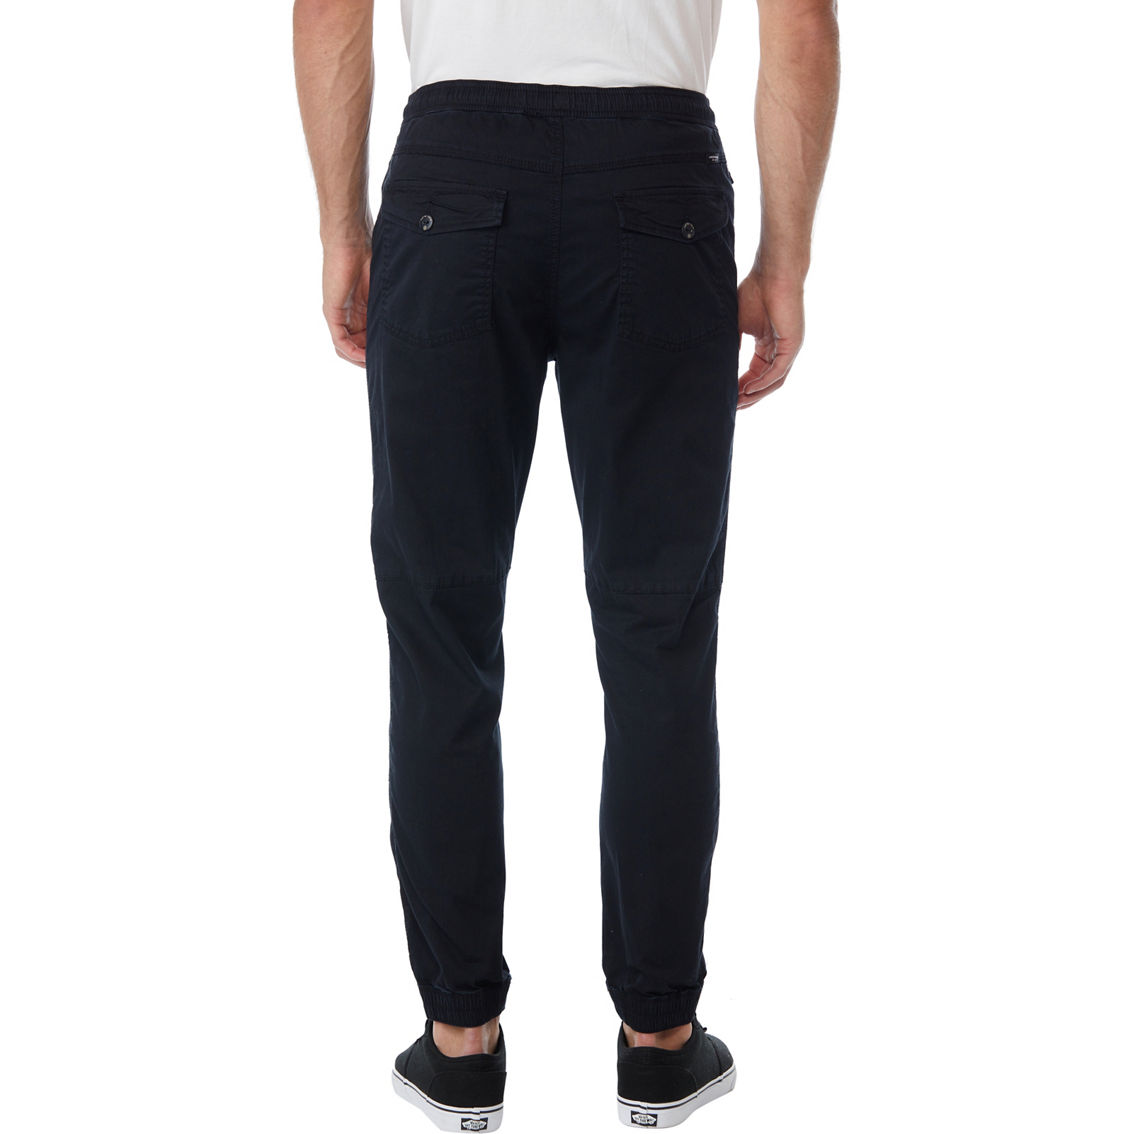 Unionbay Charger Joggers | Pants | Clothing & Accessories | Shop The ...